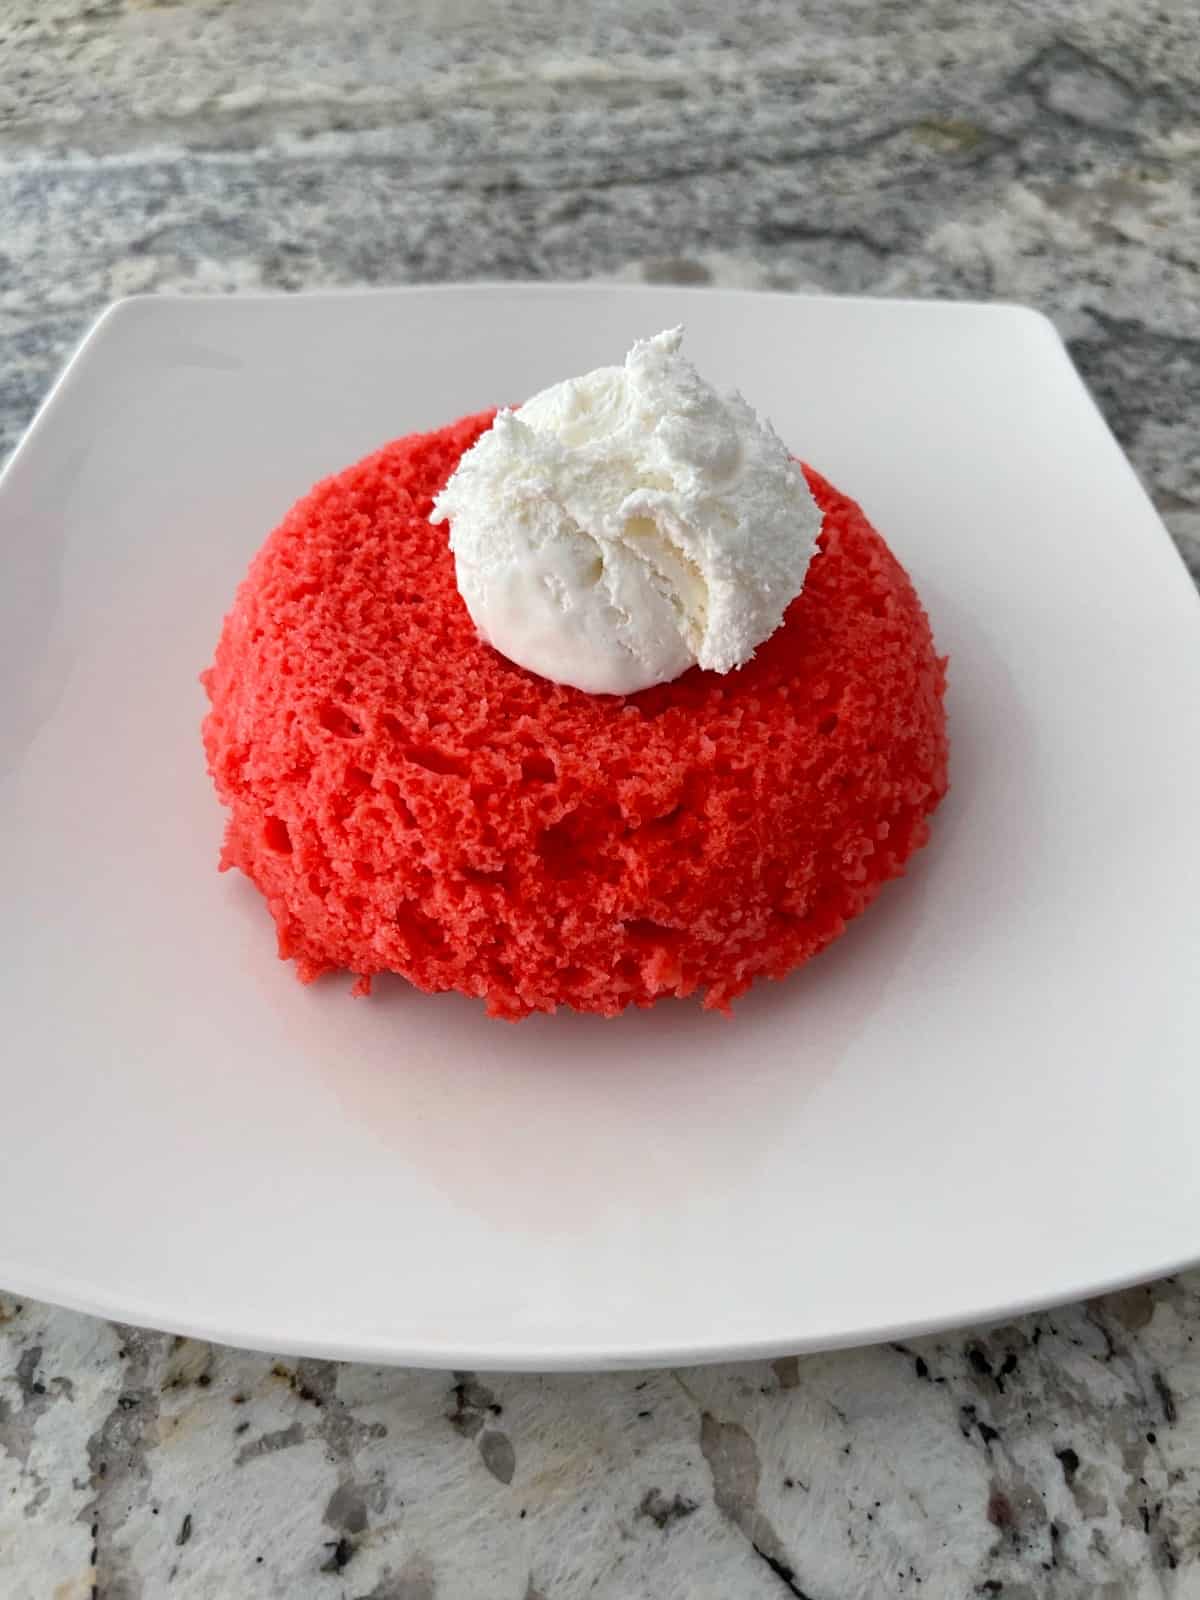 Raspberry Jell-o microwave cake topped with light whipped topping on small white plate.